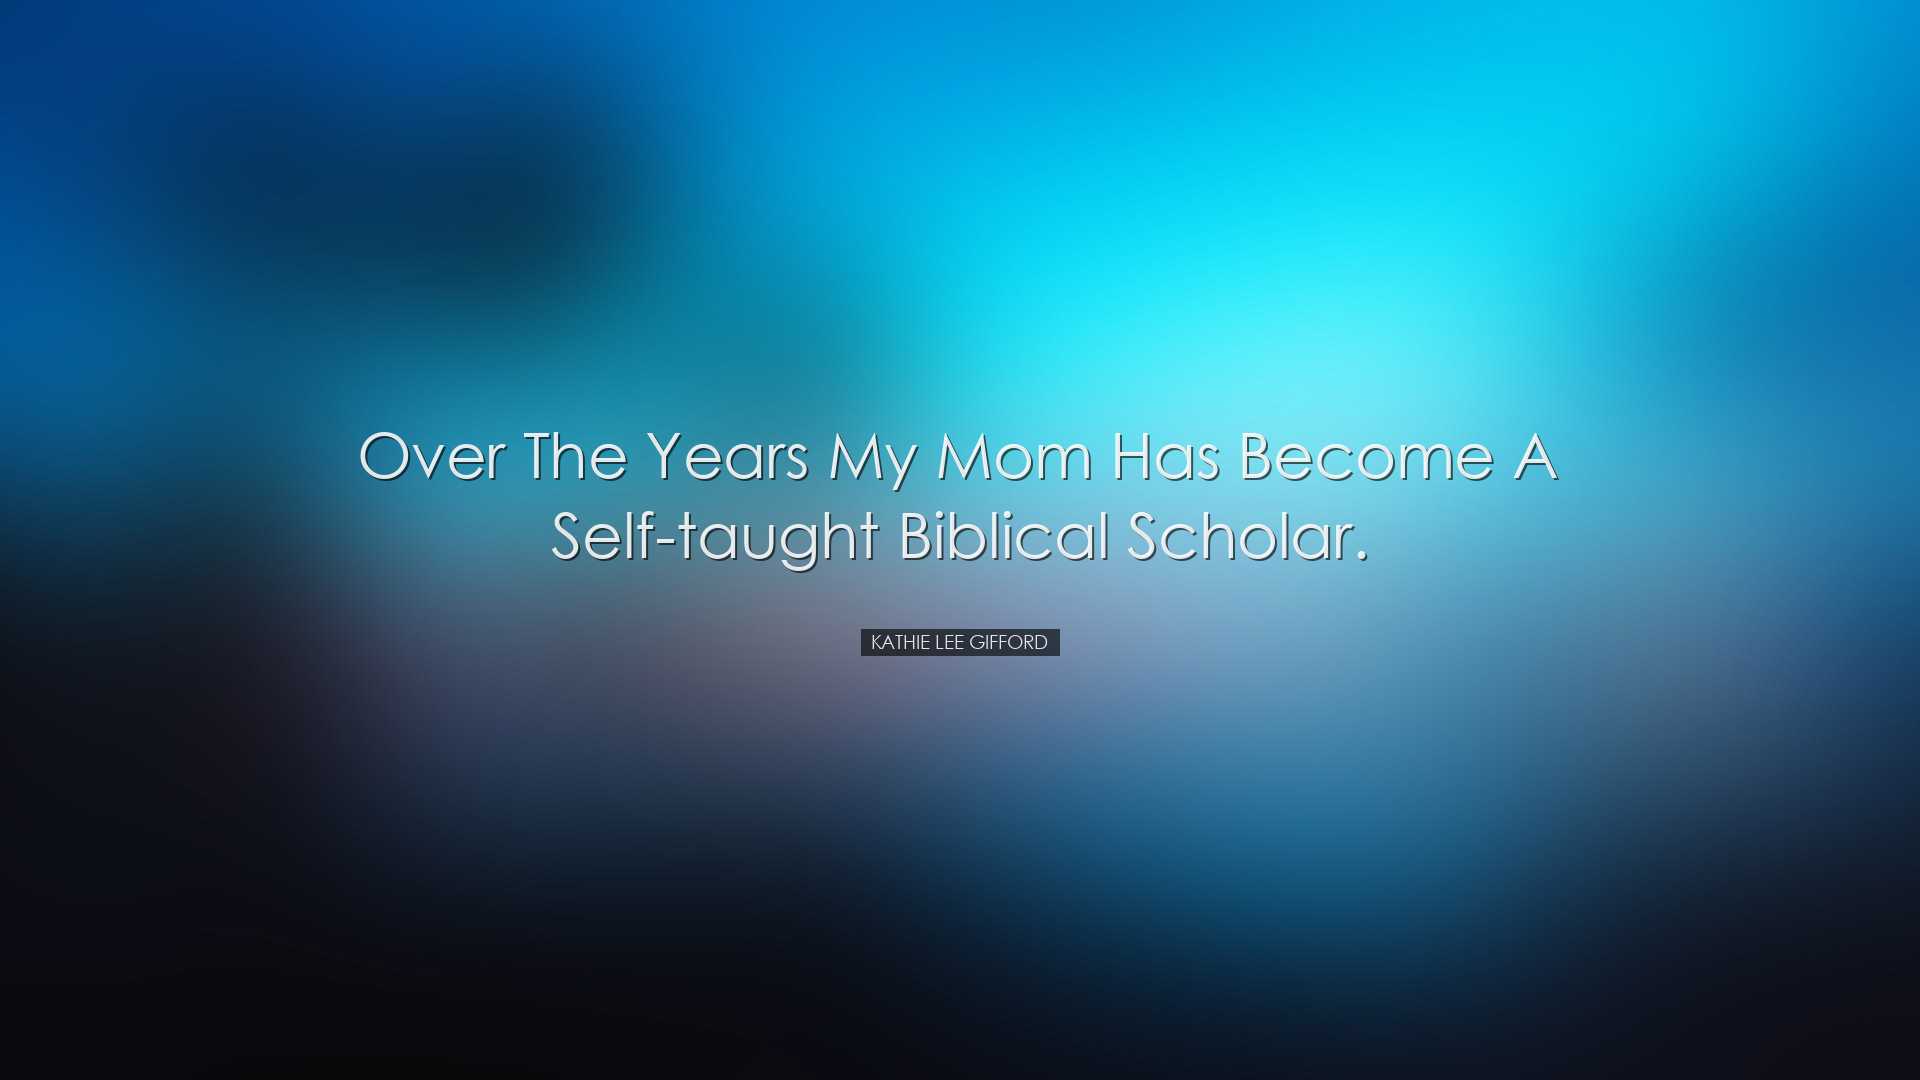 Over the years my mom has become a self-taught Biblical scholar. -